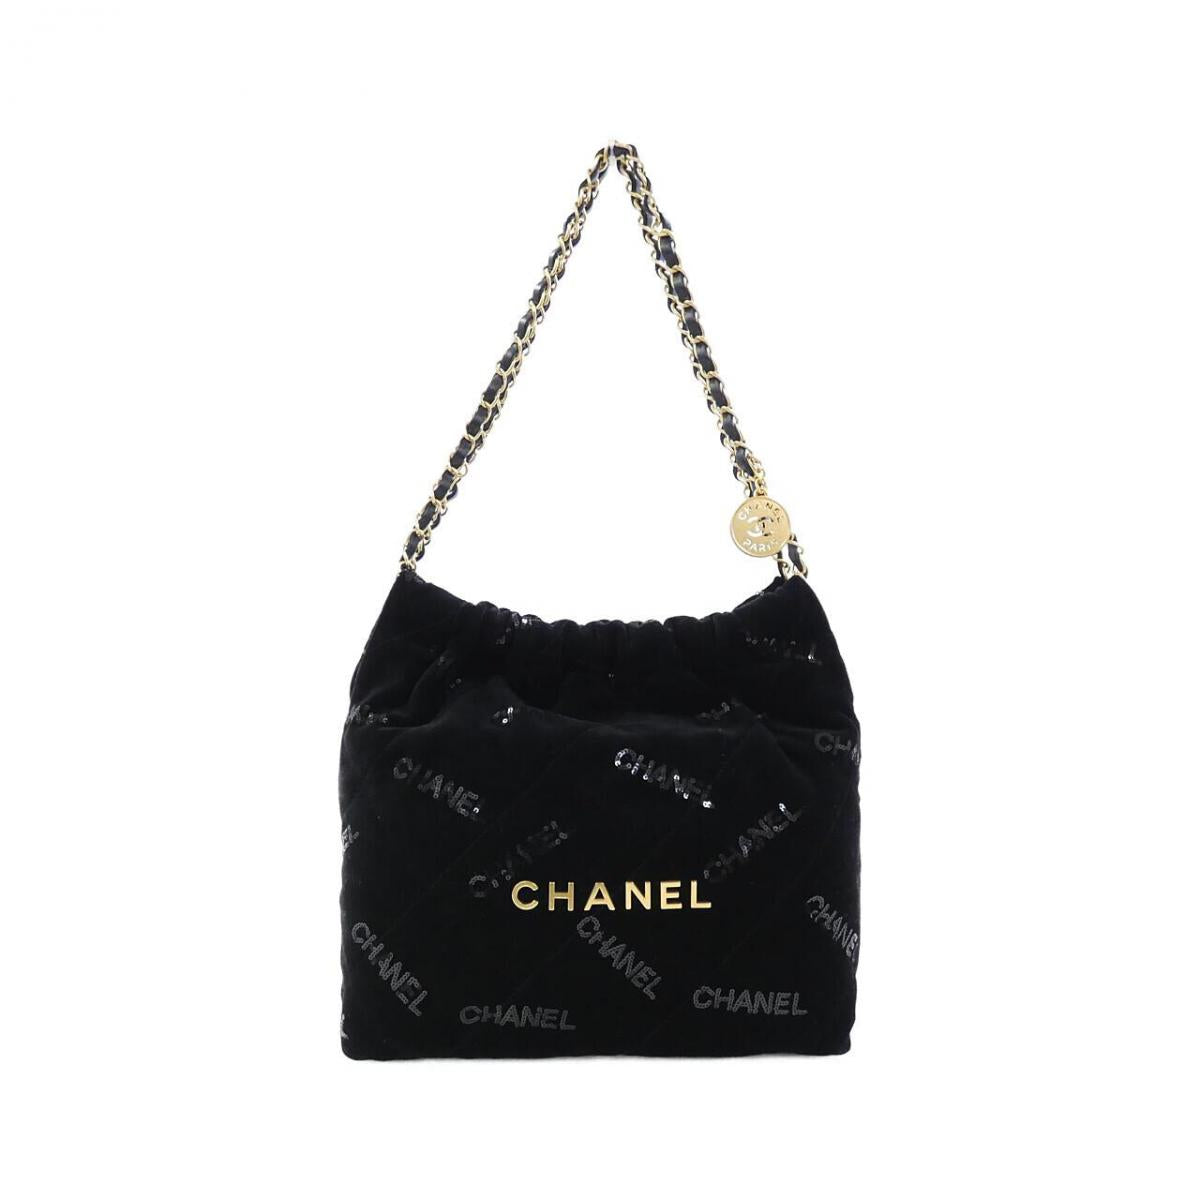 Chanel Has Broken Again - Another Damaged 22 Bag! LVlovercc Scared